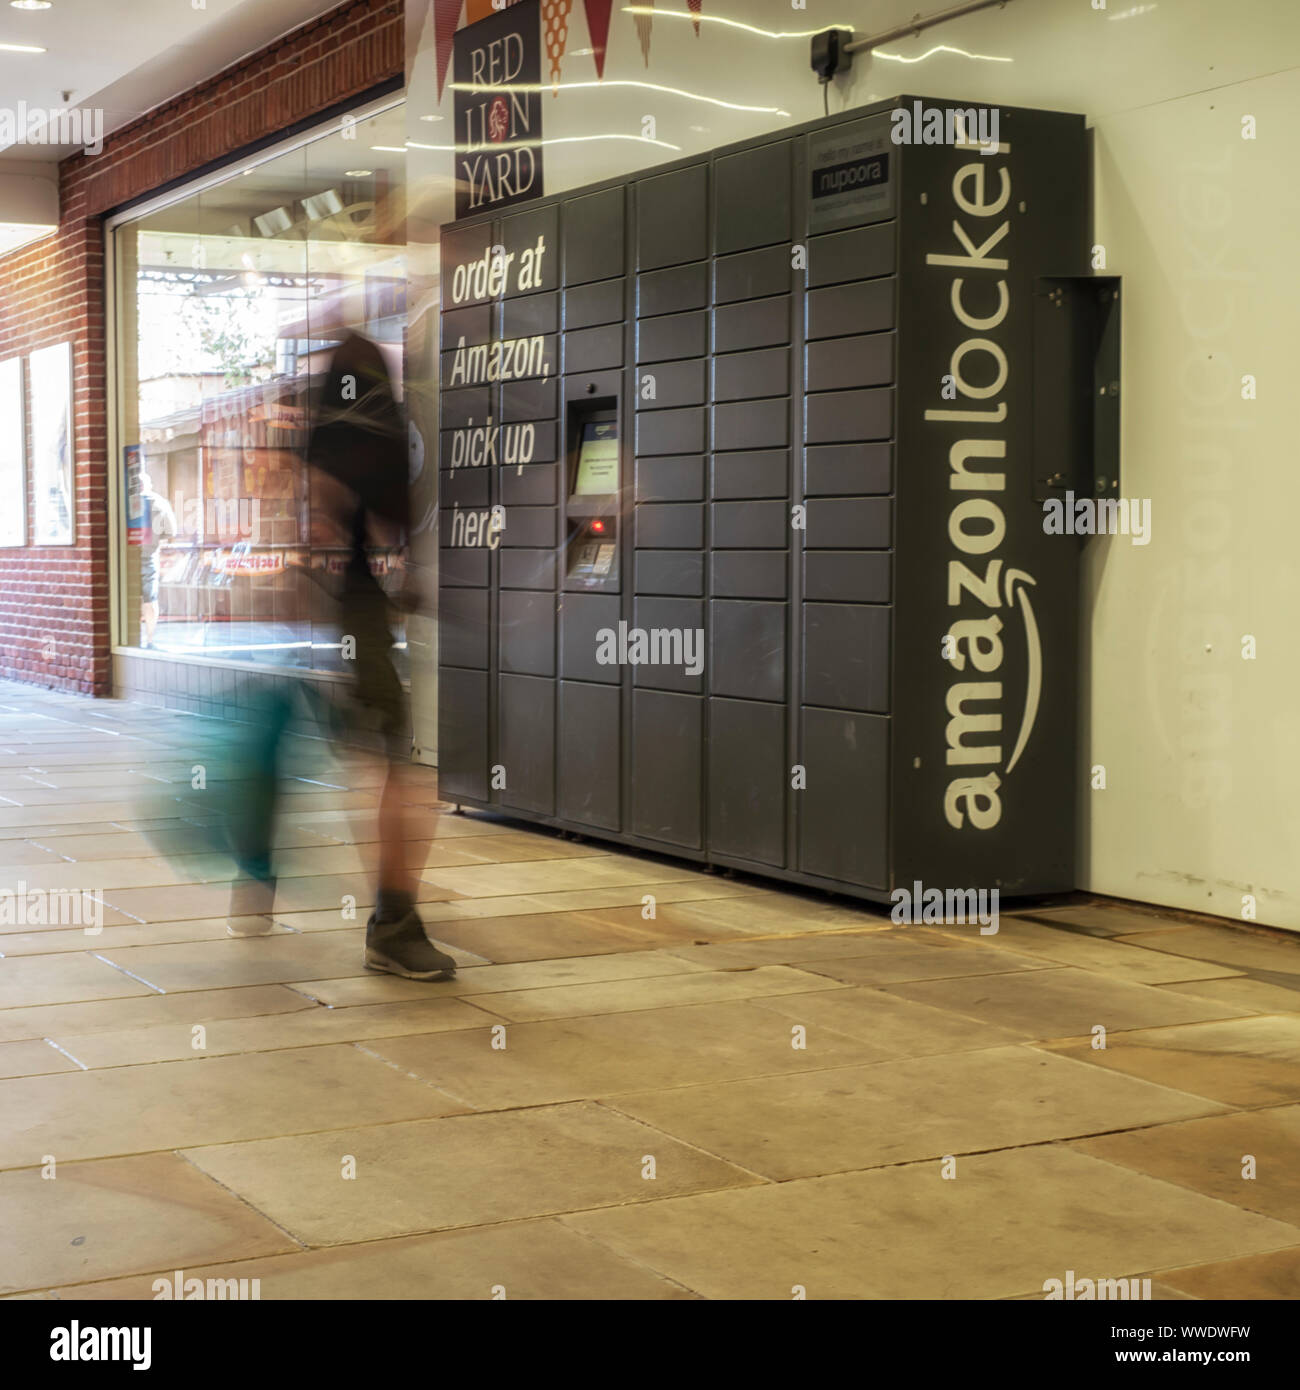 COLCHESTER, ESSEX - AUGUST 11, 2018:  Amazon pick up point Locker in retail setting Stock Photo